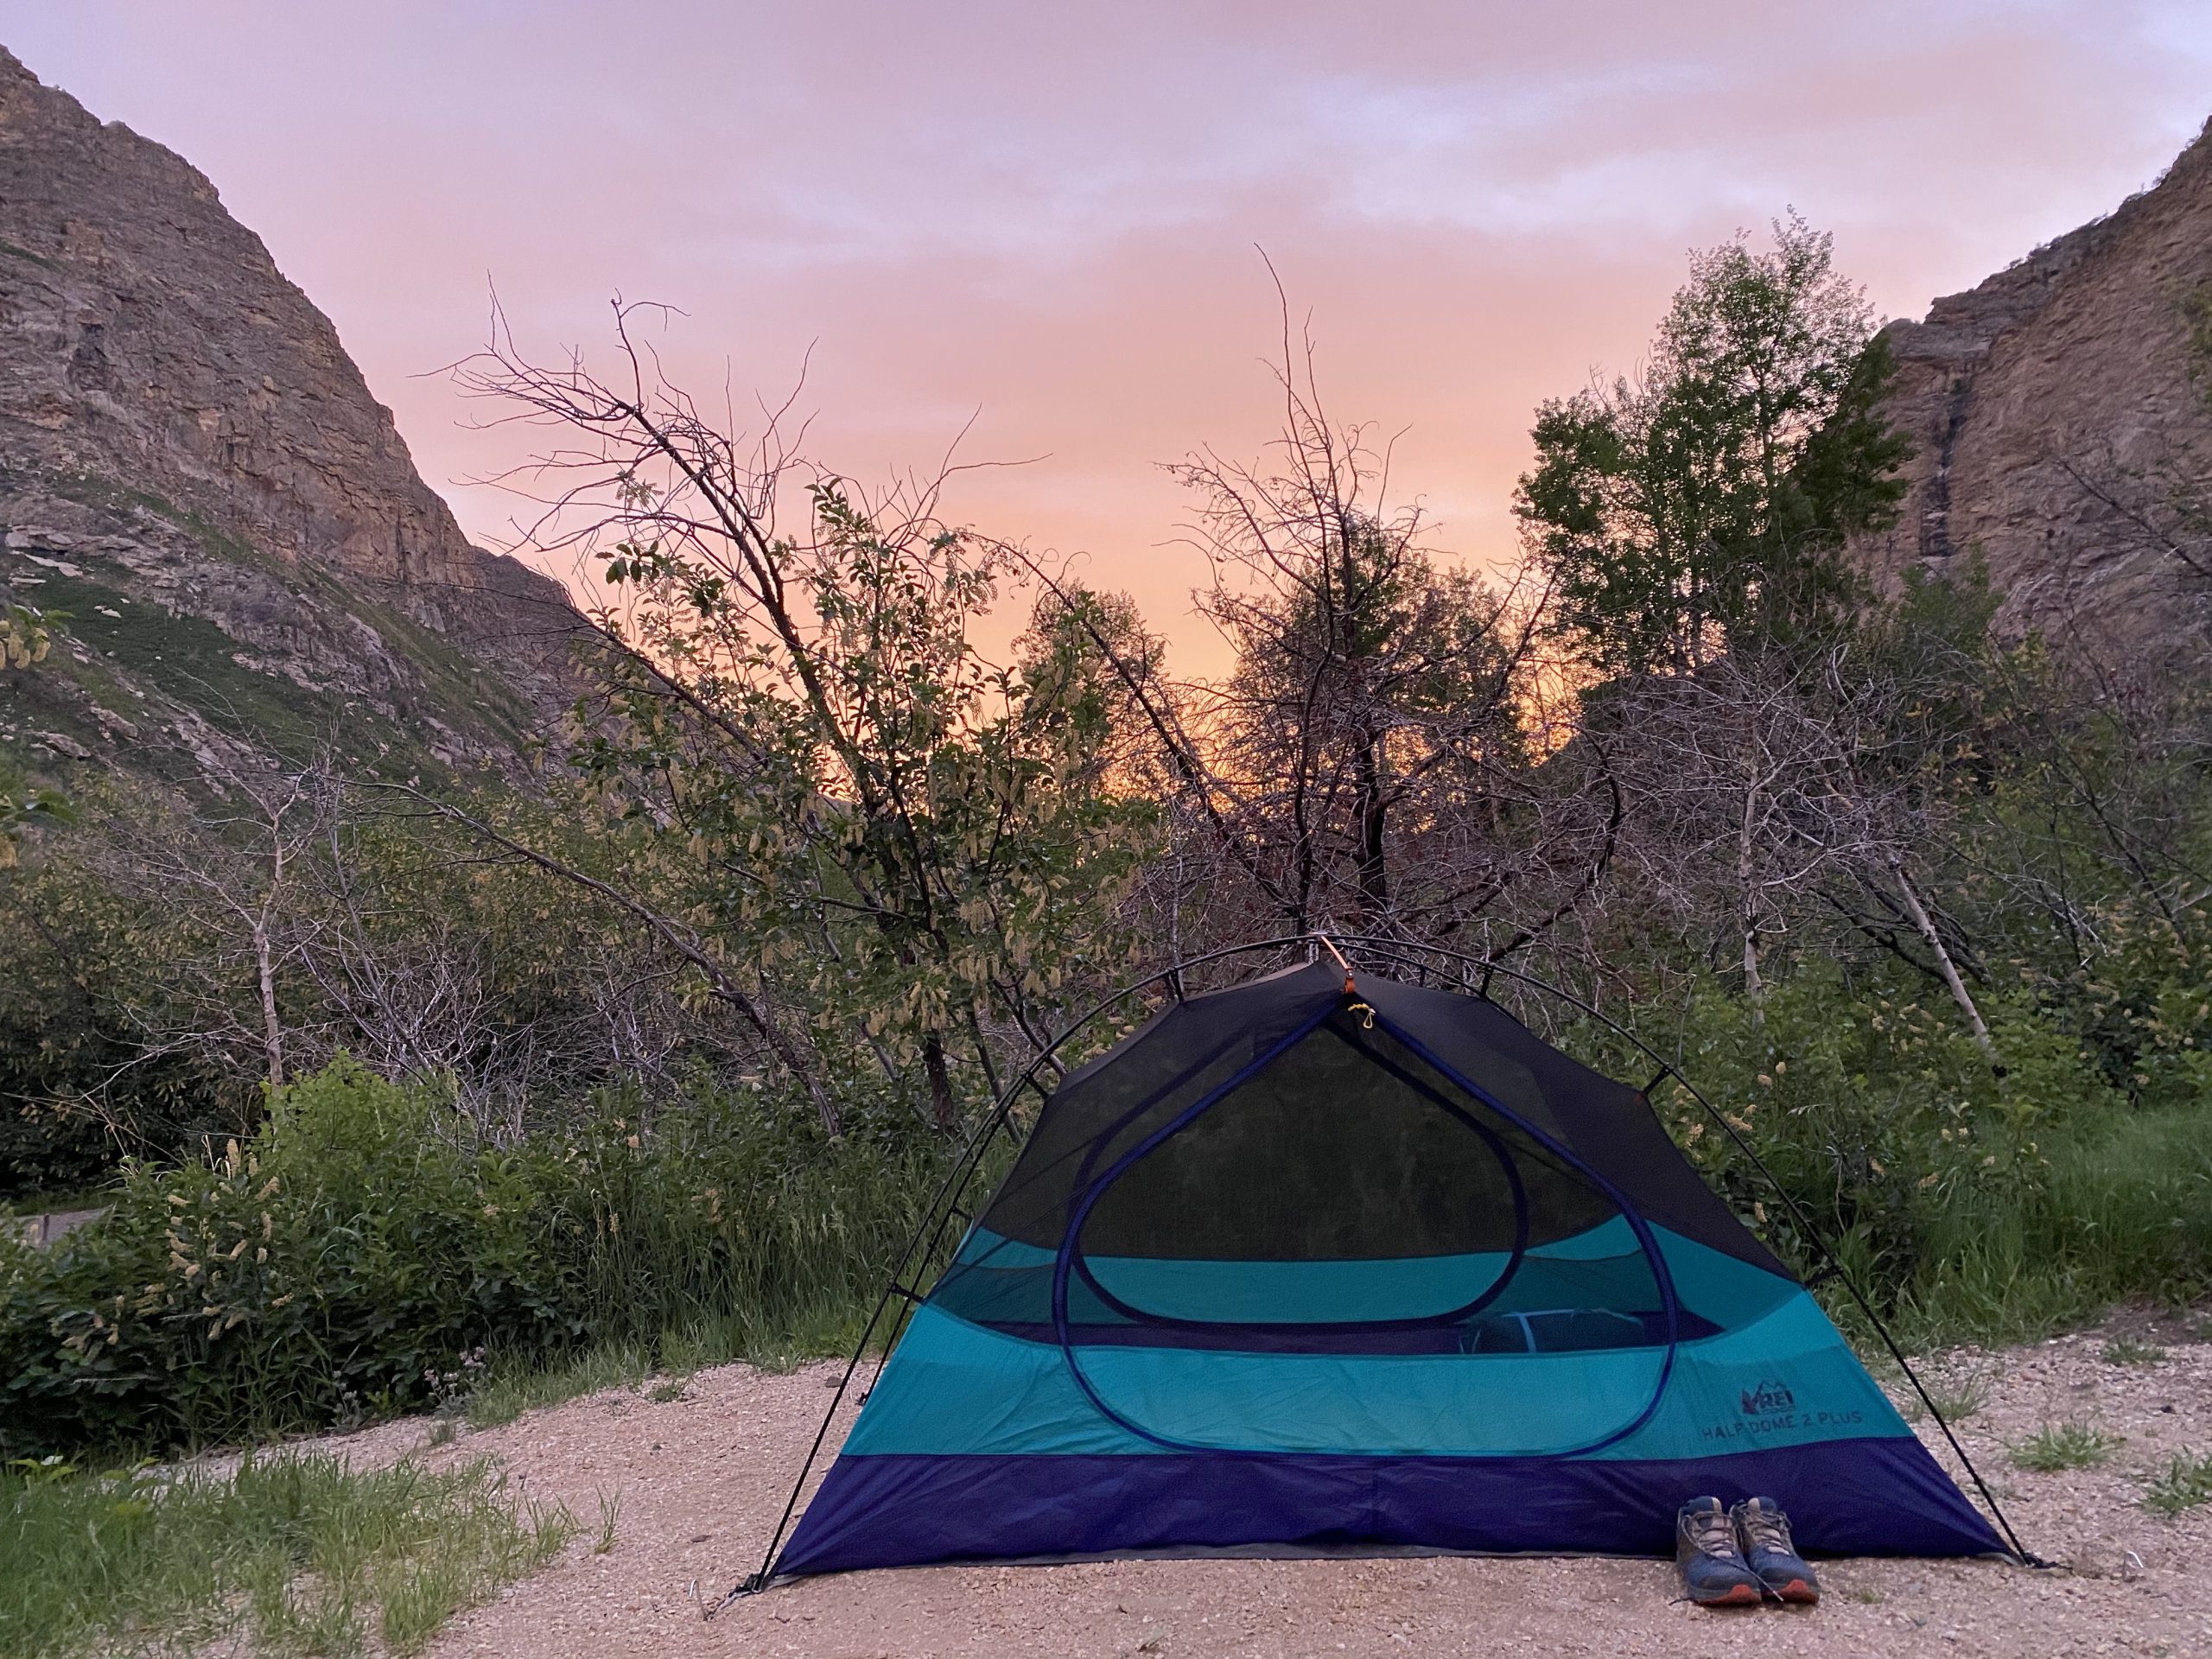 Picture of my tent in front of a pink sunset and some rocky canyon walls